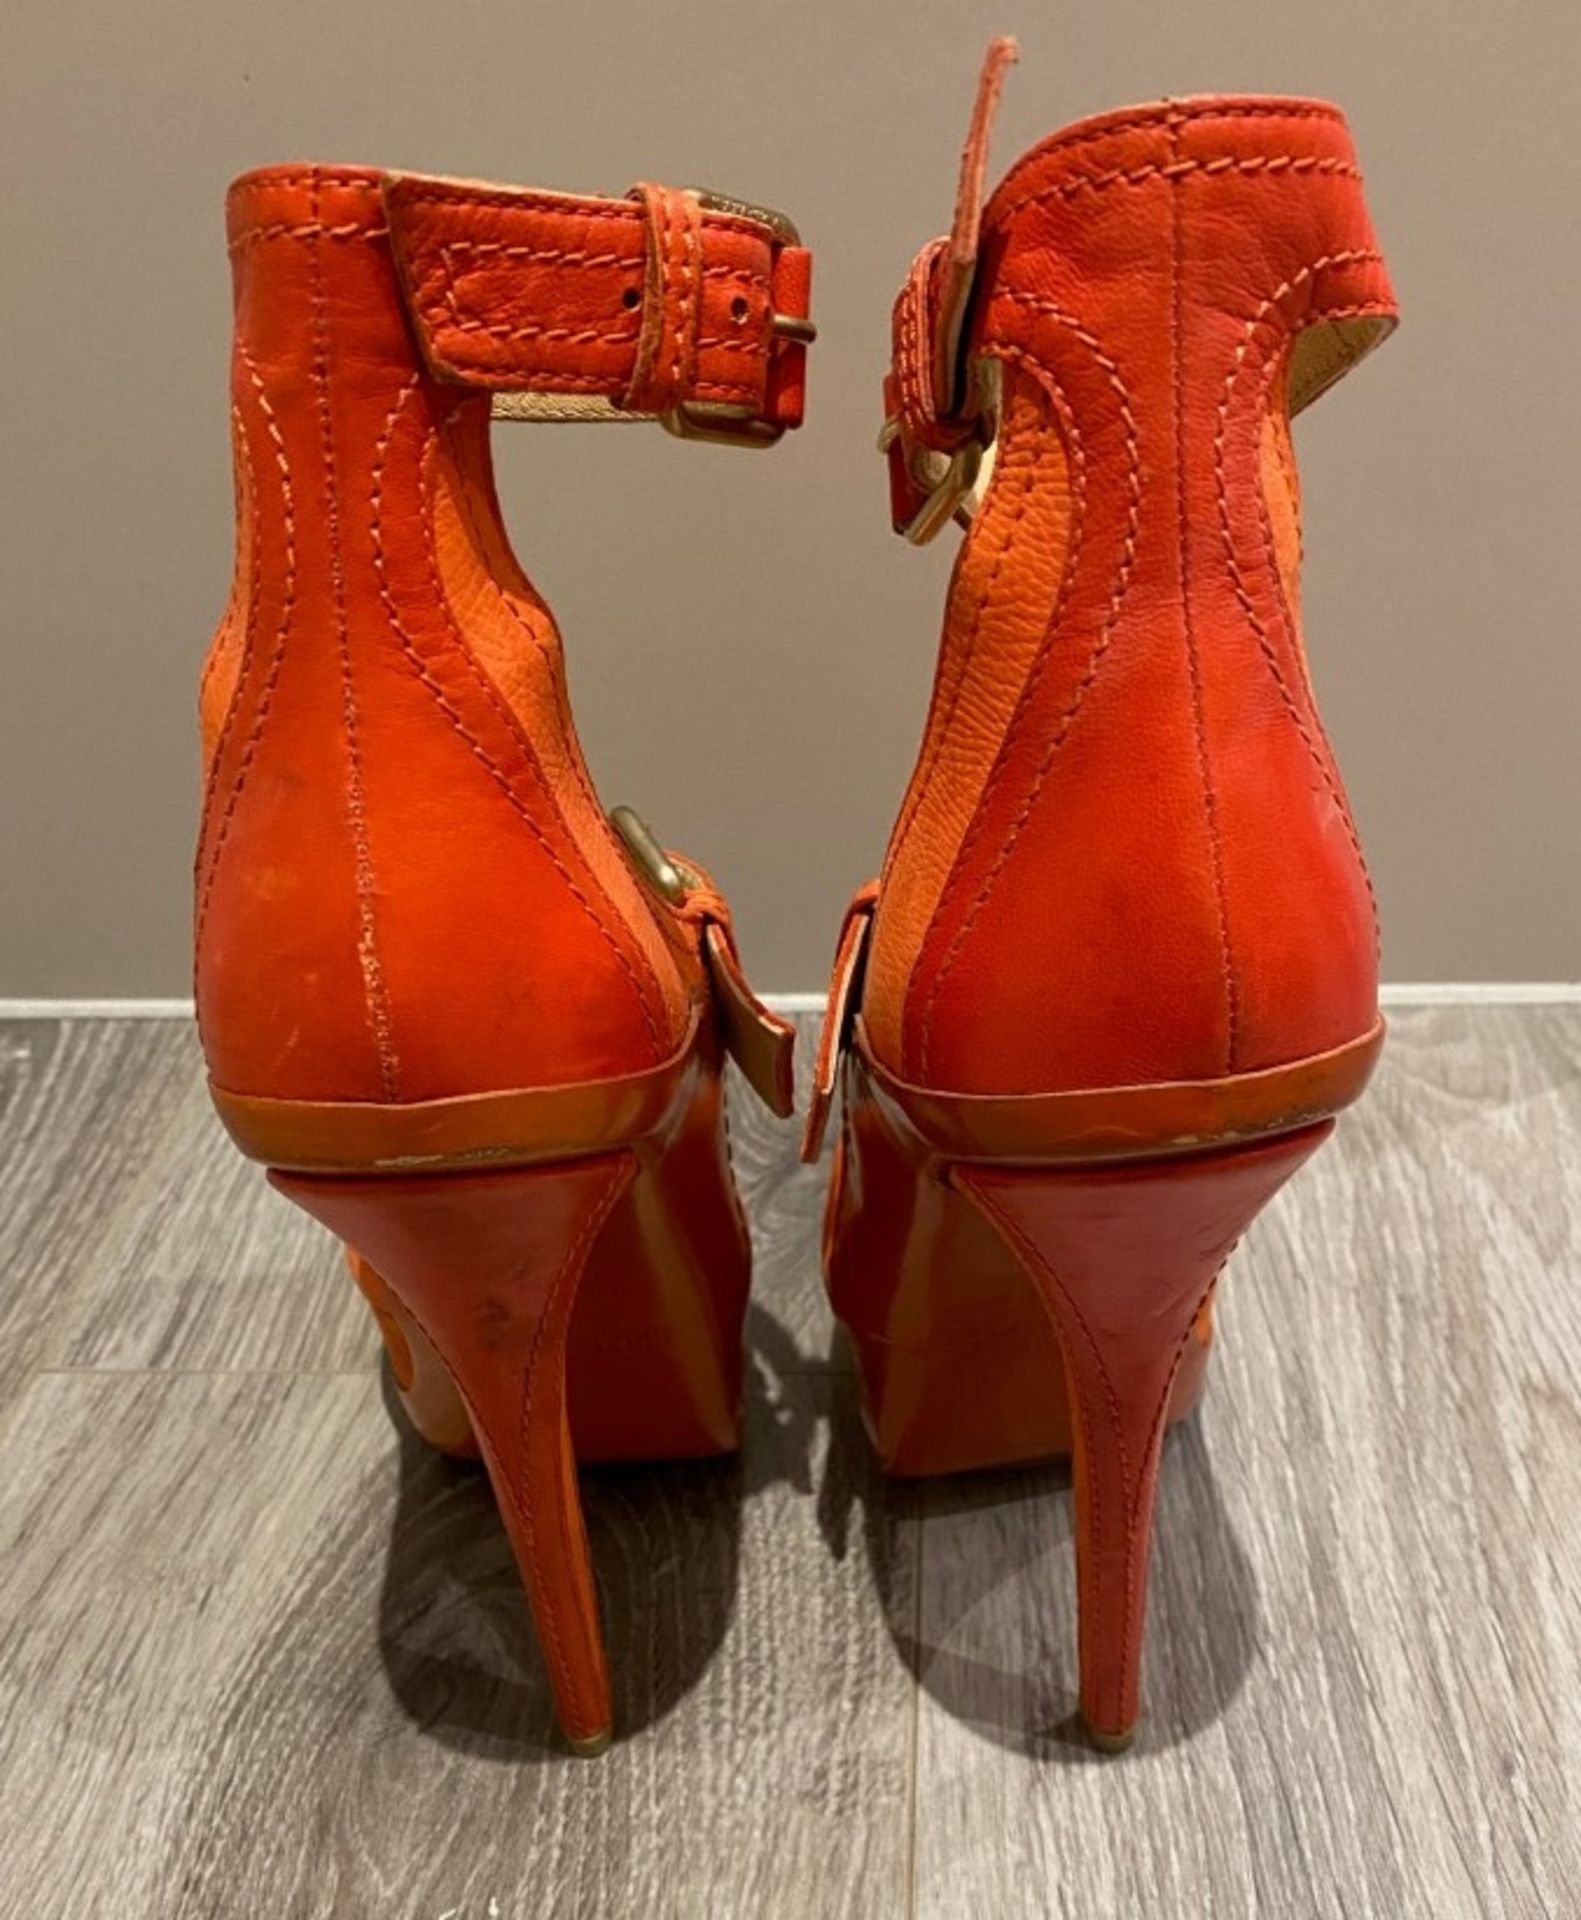 1 x Pair Of Genuine Jimmy Choo High Heel Shoes In Orange - Size: 36 - Preowned in Good Condition - R - Image 5 of 5